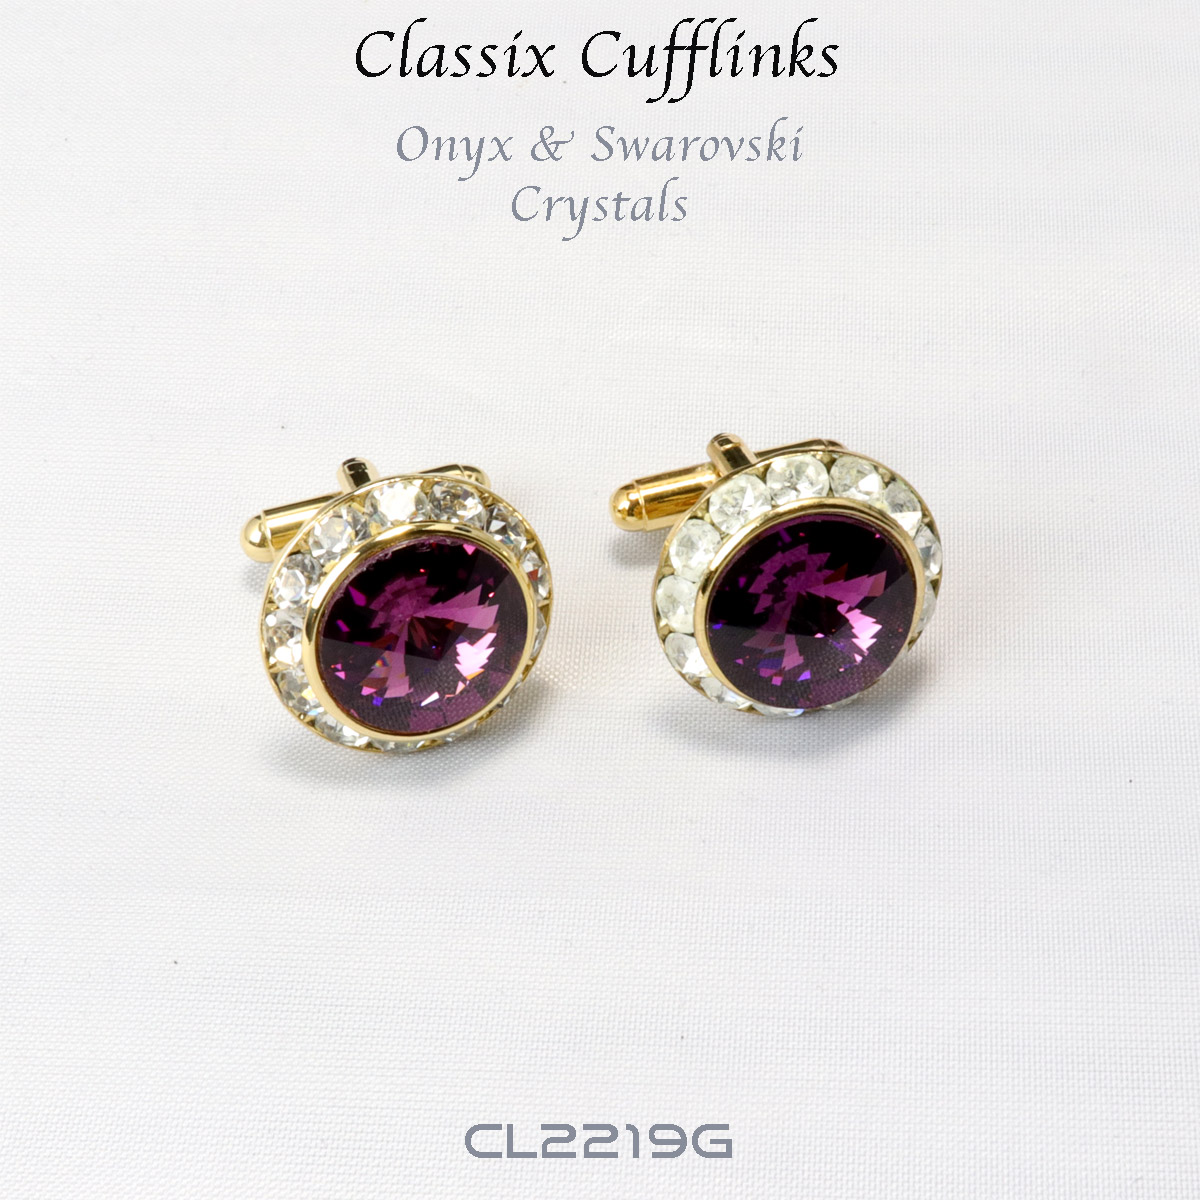 Crystal Cufflinks and Studs with Black Trim and Dark Ruby Center 